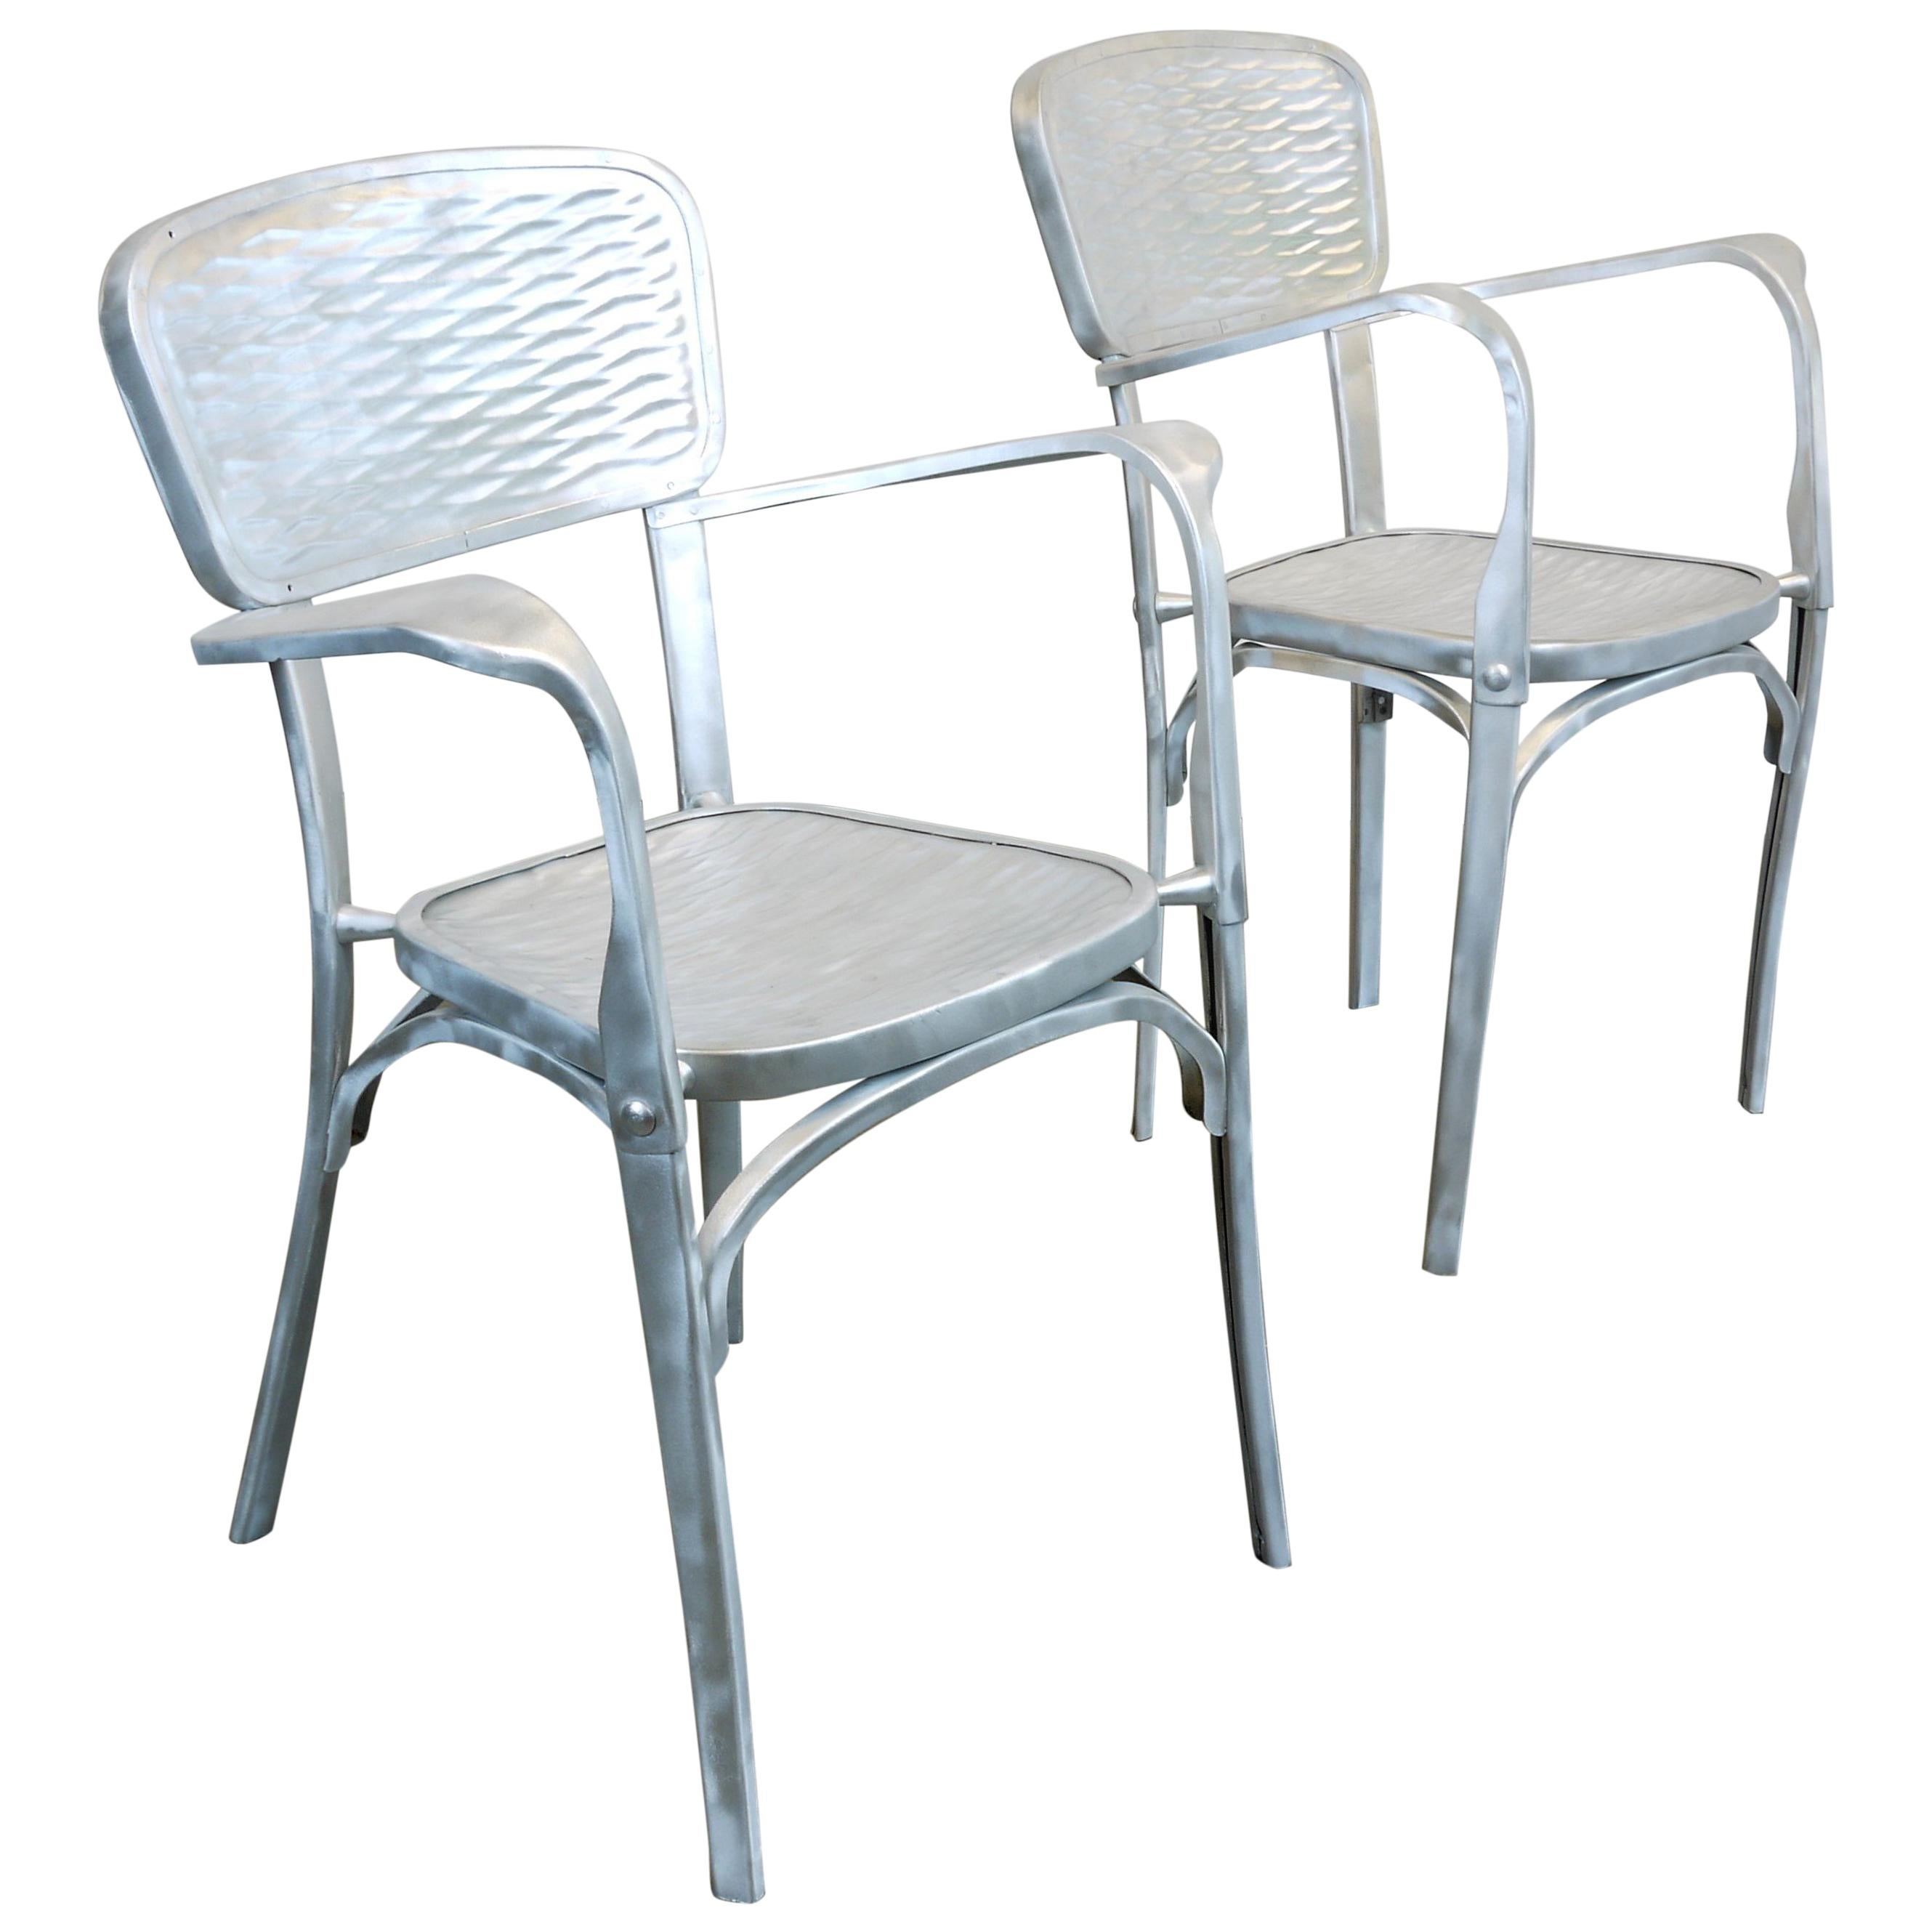 Pair of 1940s French Aluminium Dining -Side Chairs